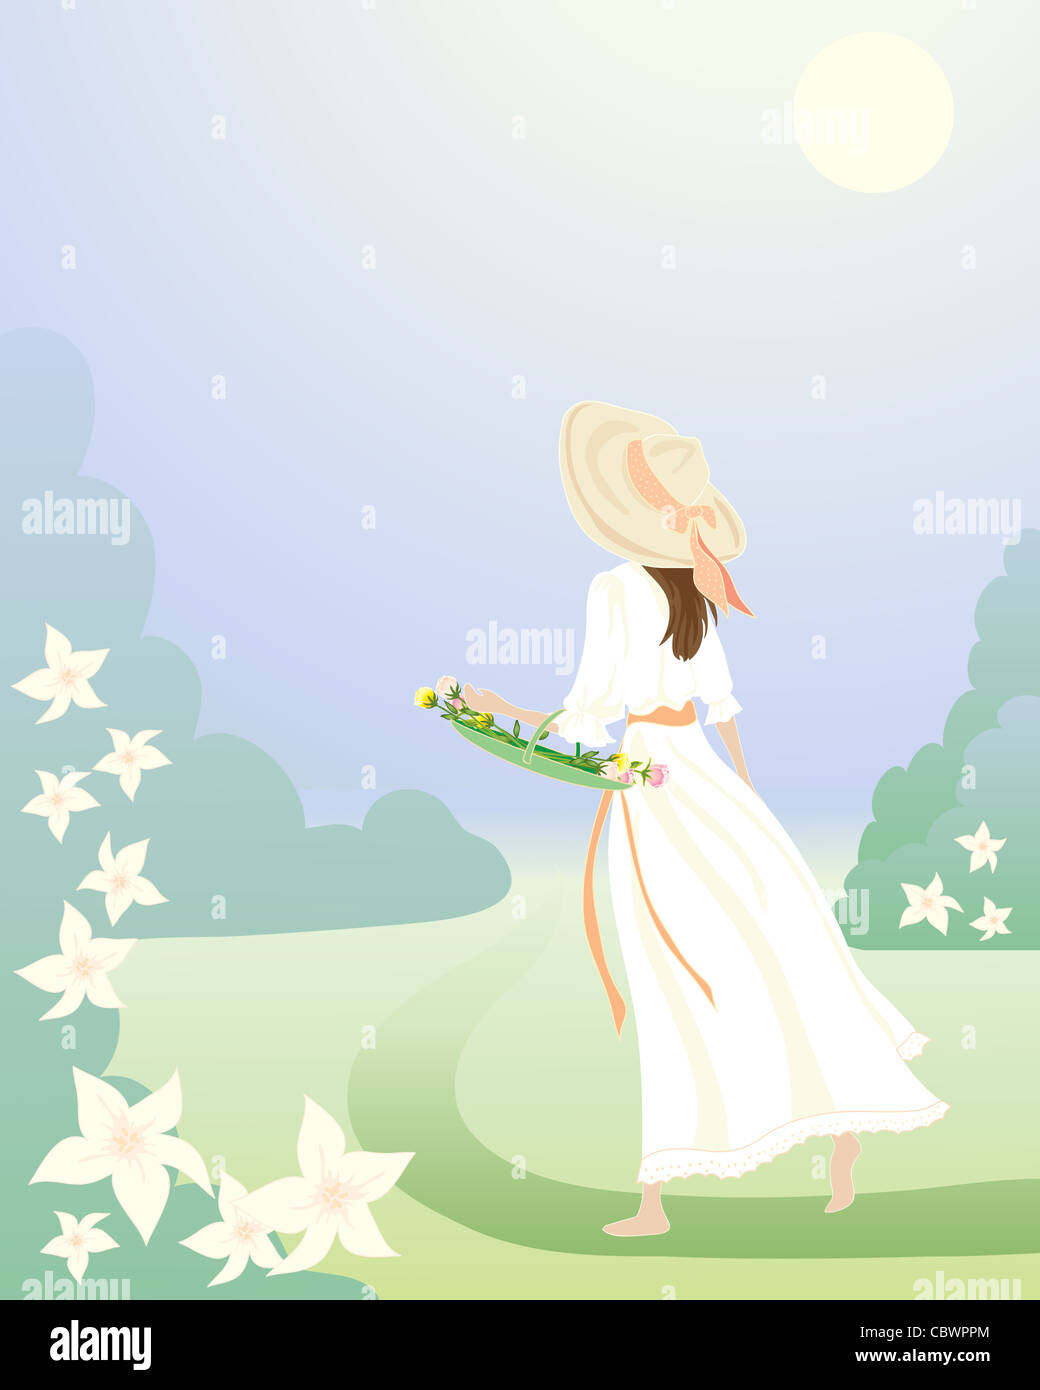 an illustration of a romantic garden with a woman in a white dress walking along the grass with a basket of roses Stock Photo